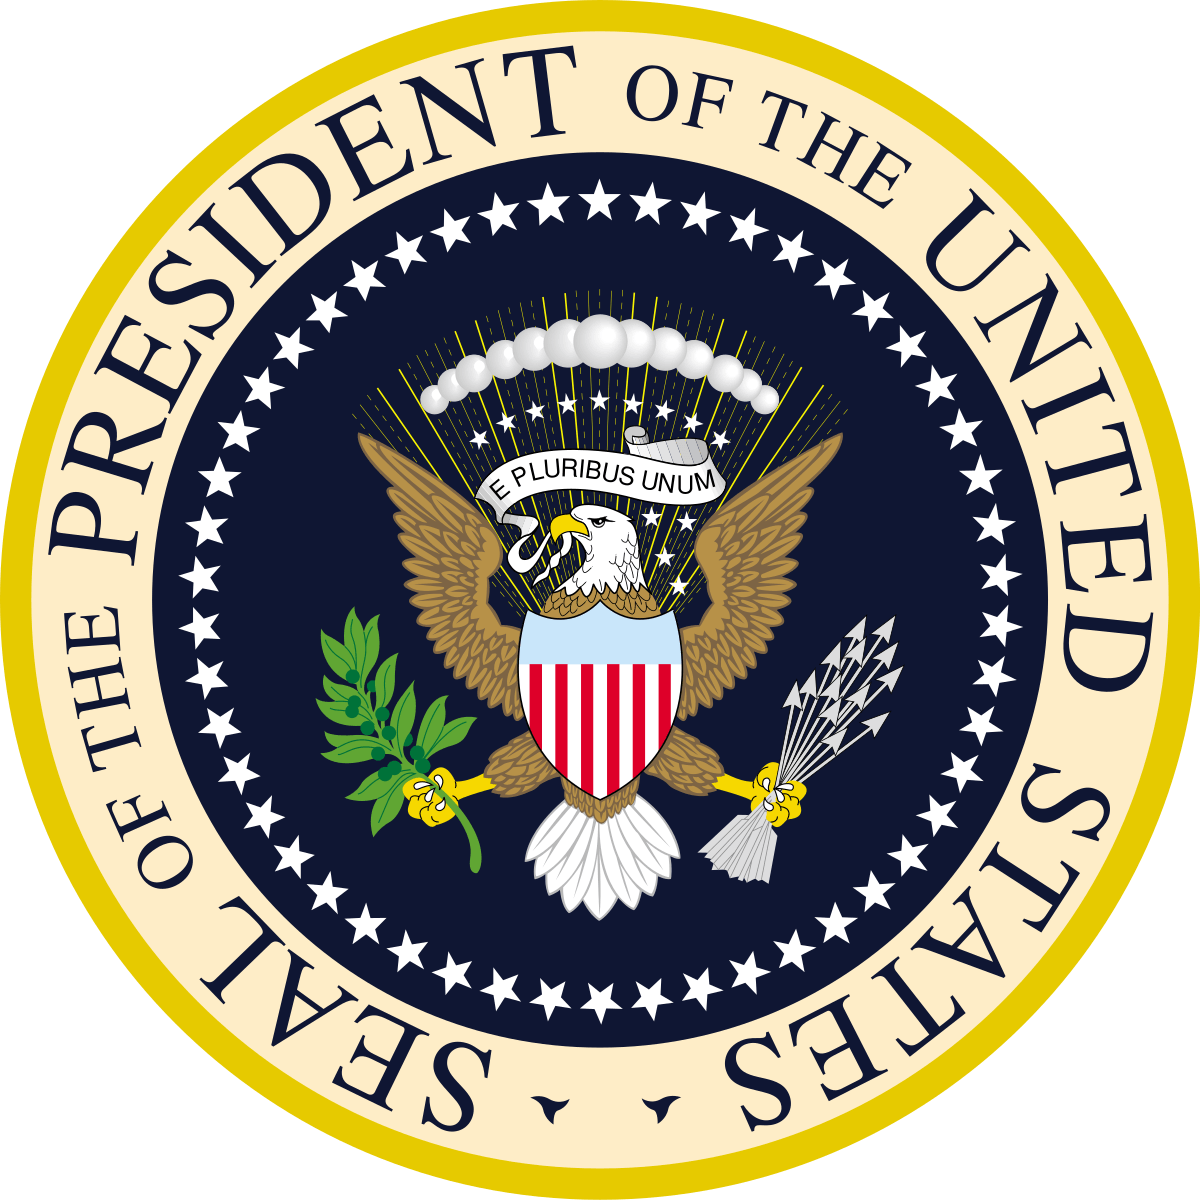 United States Eagle Logo - Seal of the President of the United States